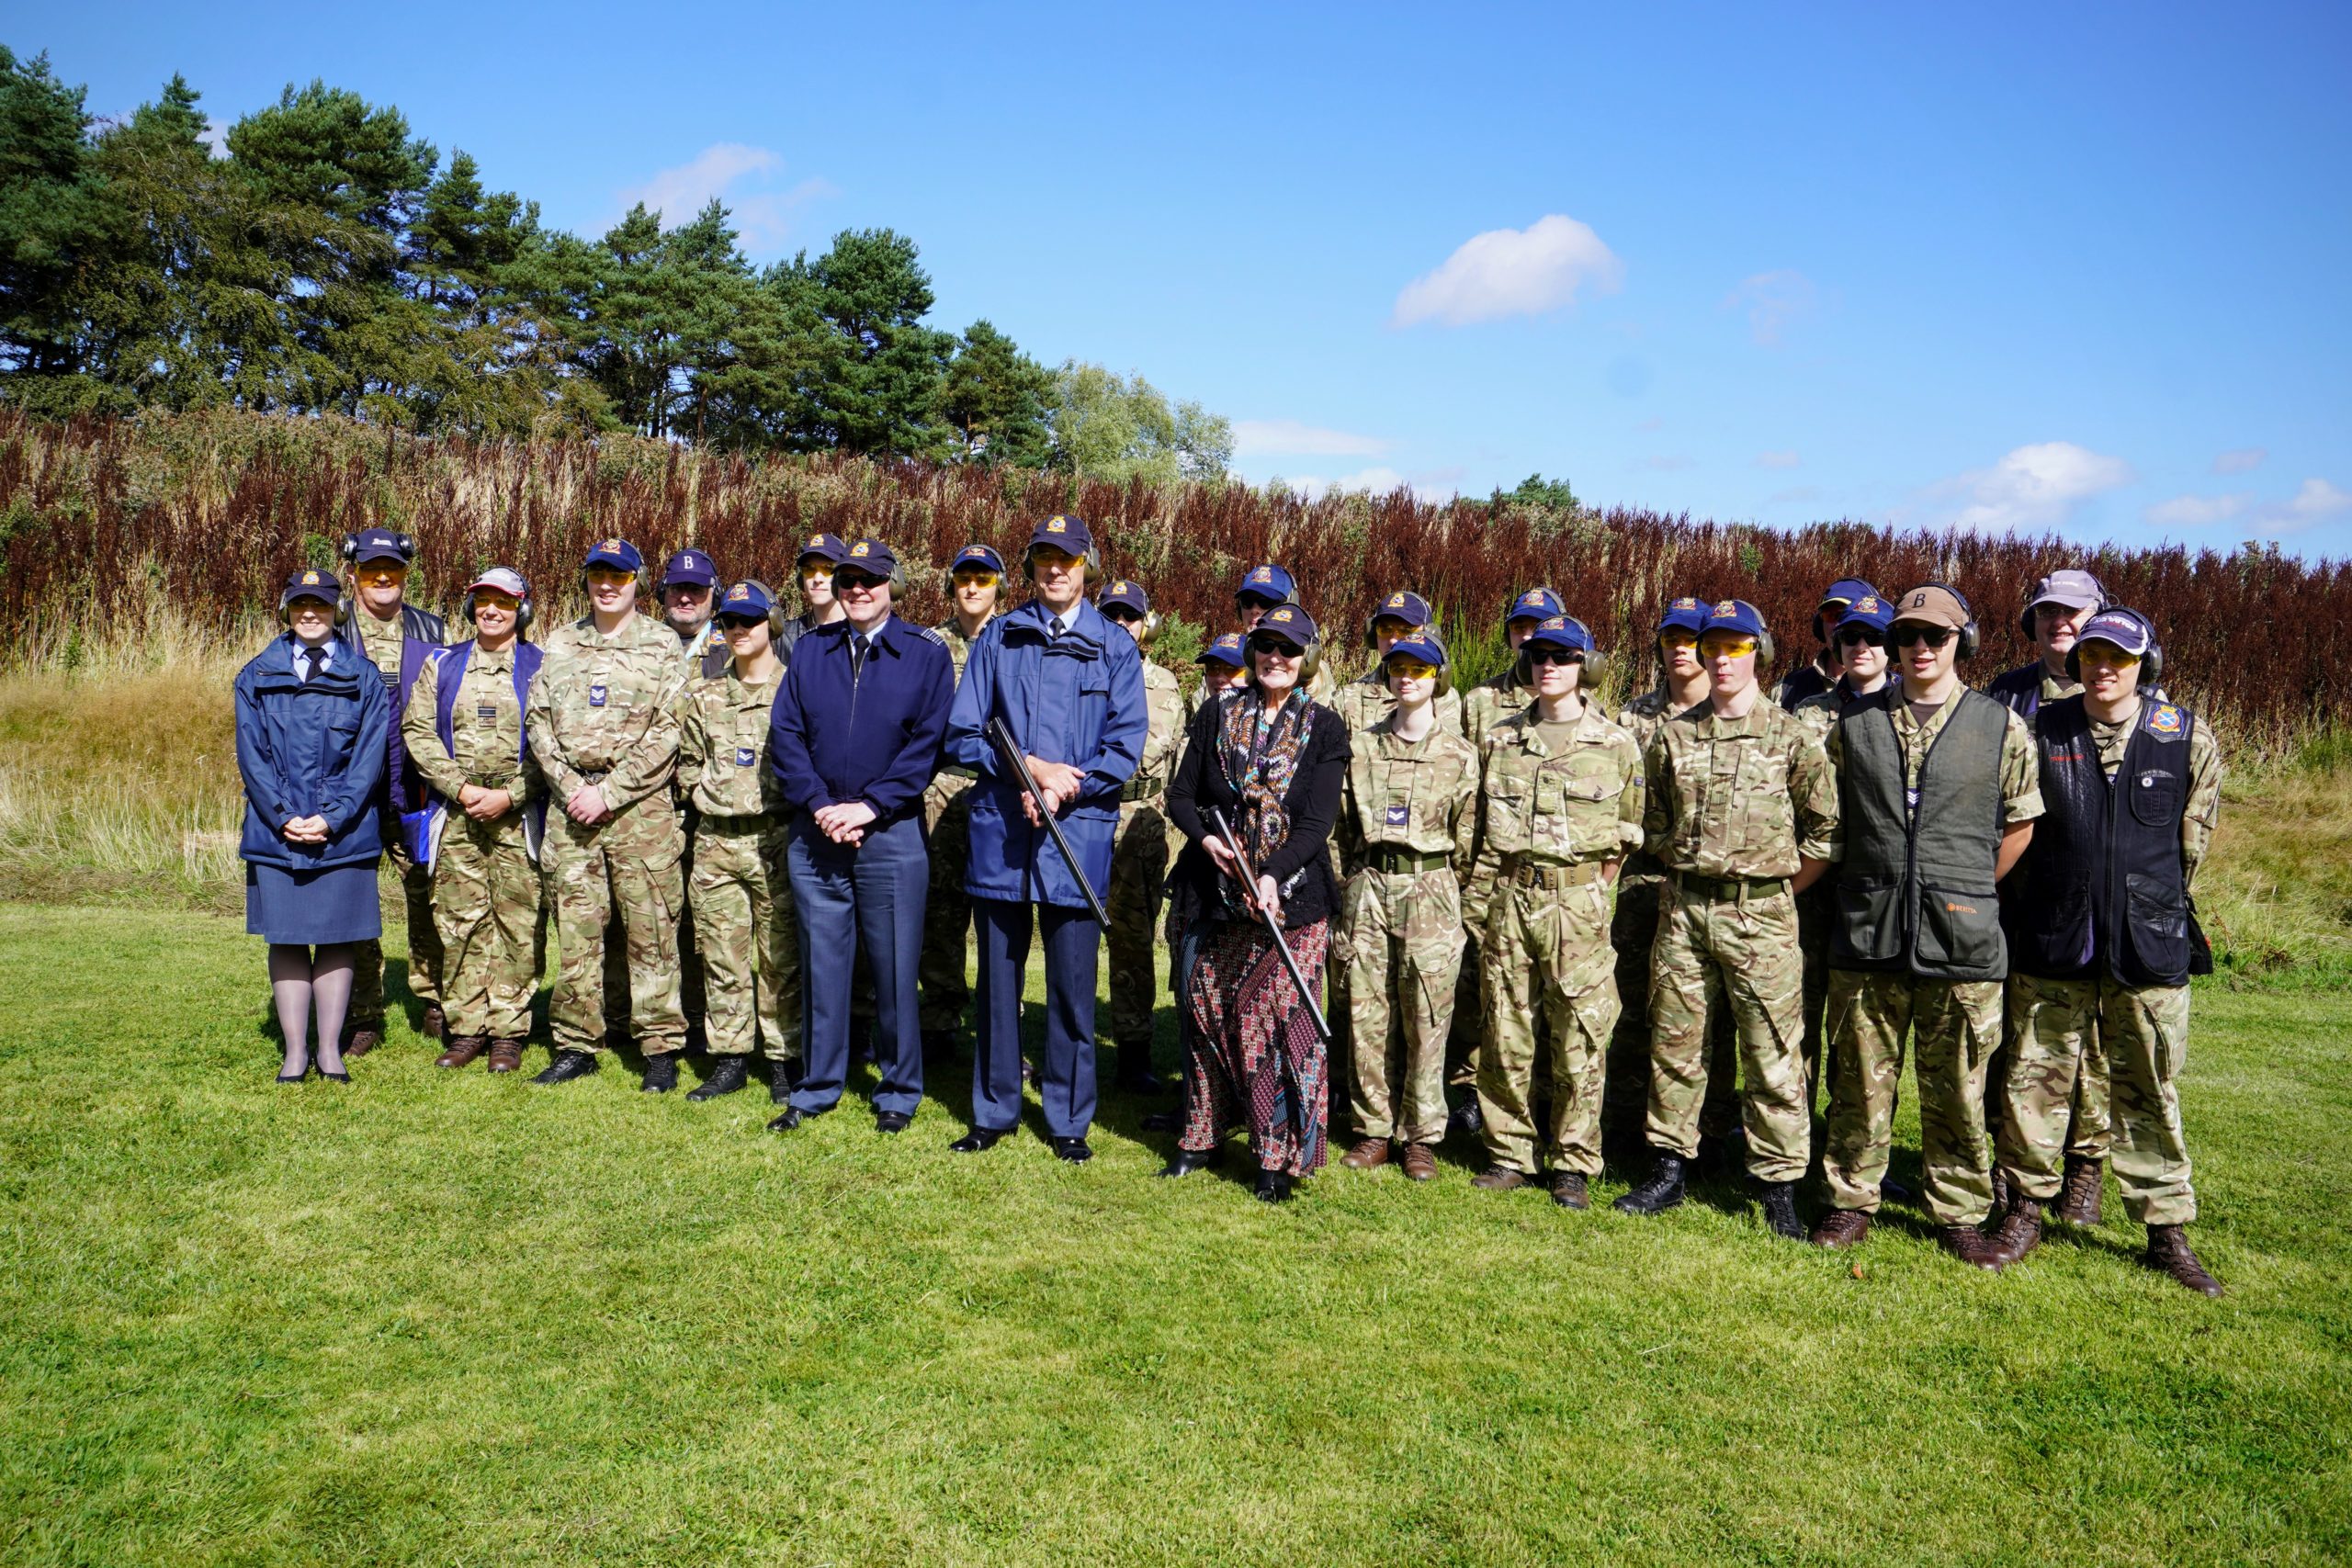 Air Cadets and VIP pose for a photography